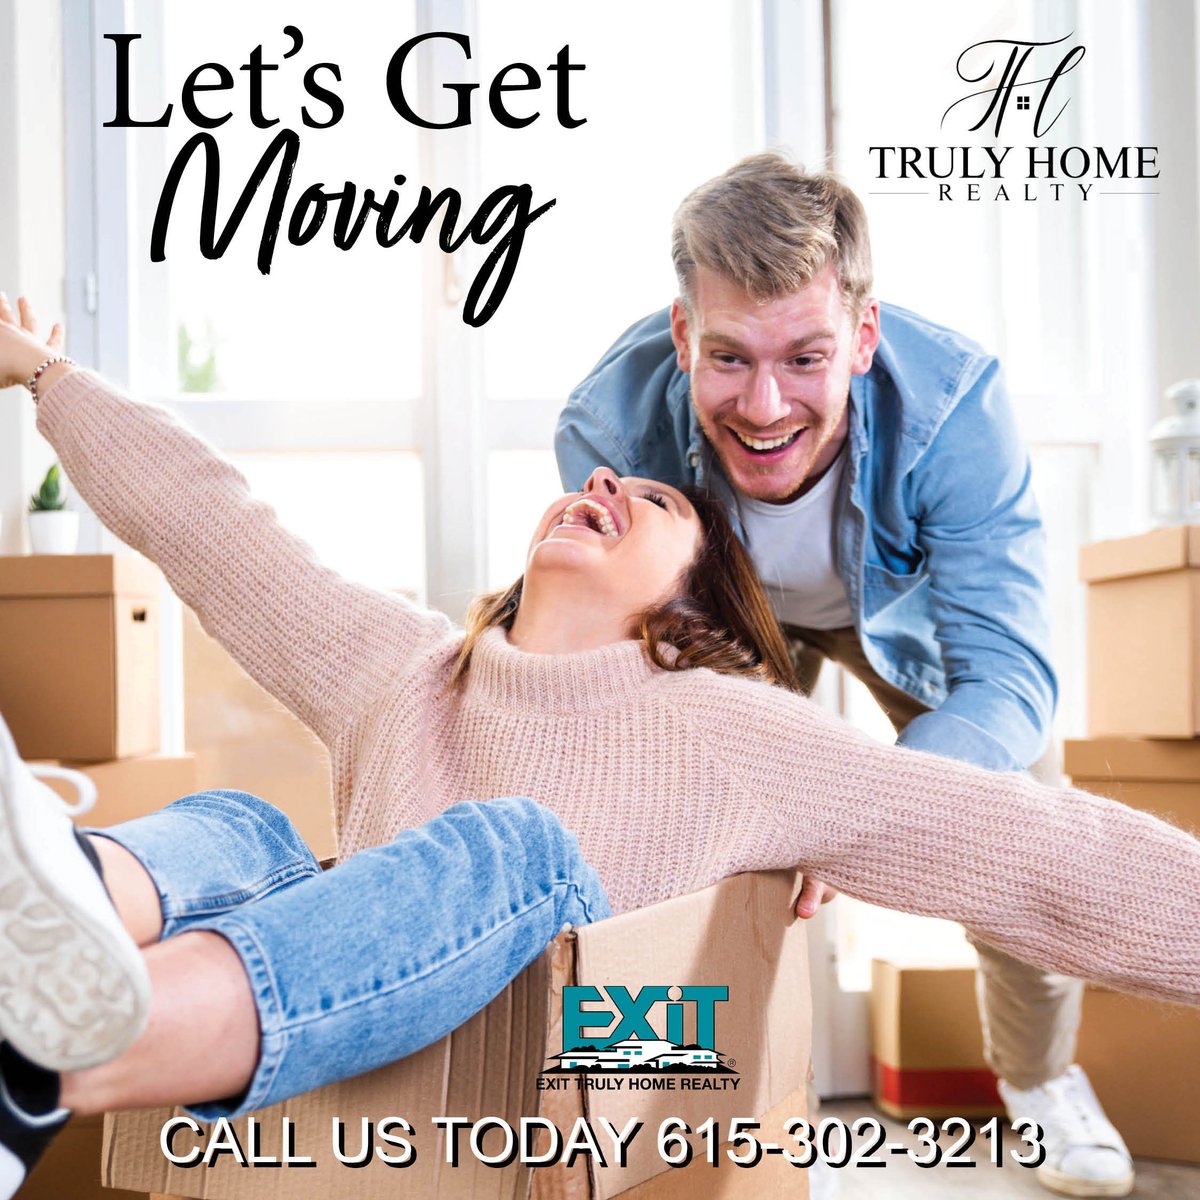 Let's get moving!
Call us today - We are ready to get to work for you!

#TennesseeRealtor #EXITTrulyHomeRealty #realestate #realtor #nashvilletn #nashvegas #exit #exitrealty #homesforsale #sellmyhome #househunting #dreamhome #newhome #realestateagent #forsale #property #home